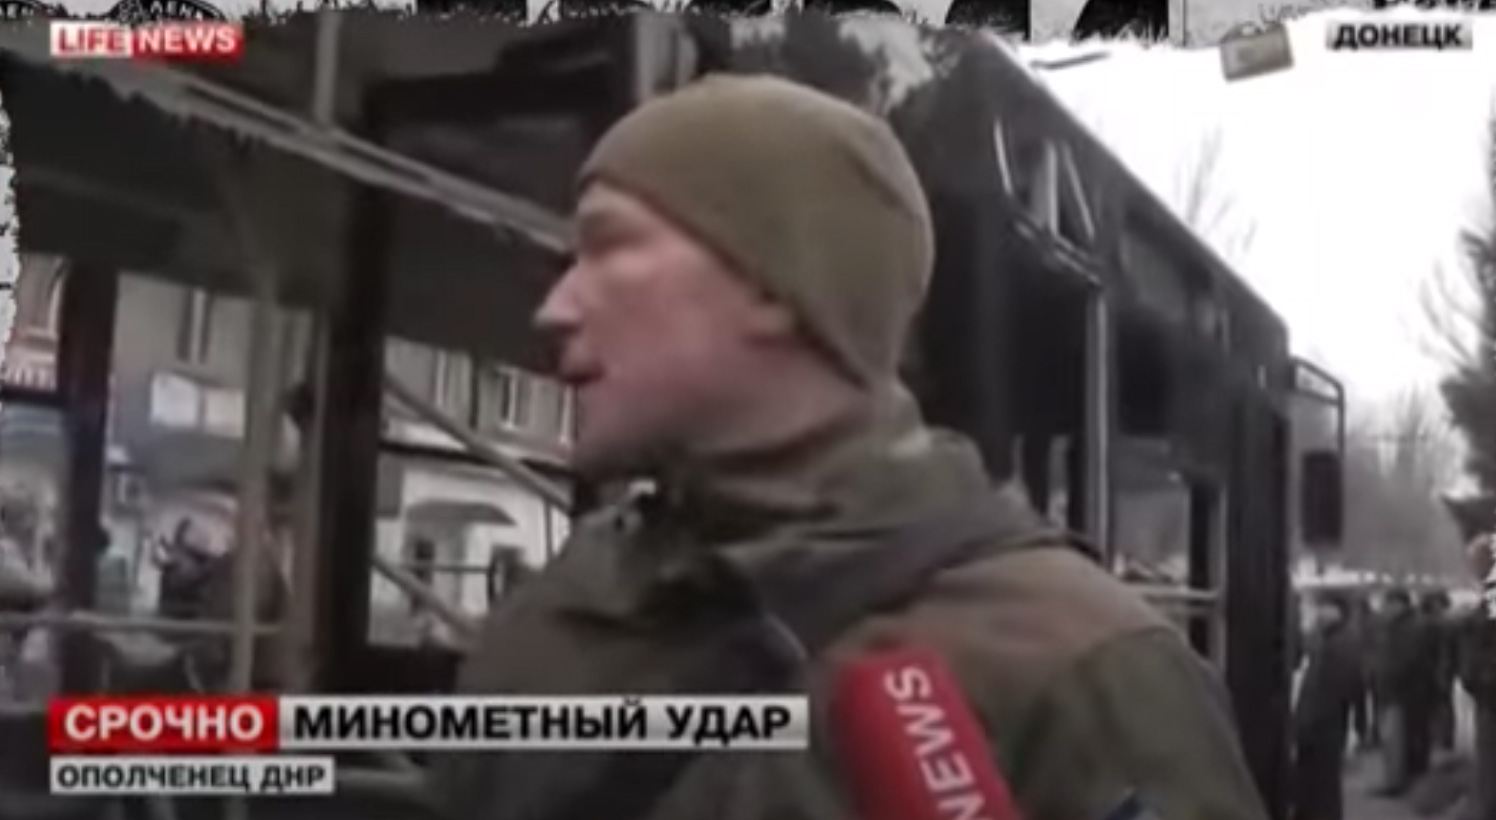 Russian propagandists from the Life News channel rehearse a disinformation plot at the site of shelling of the Donetsk Girmash transport stop in Donetsk on January 22, 2015